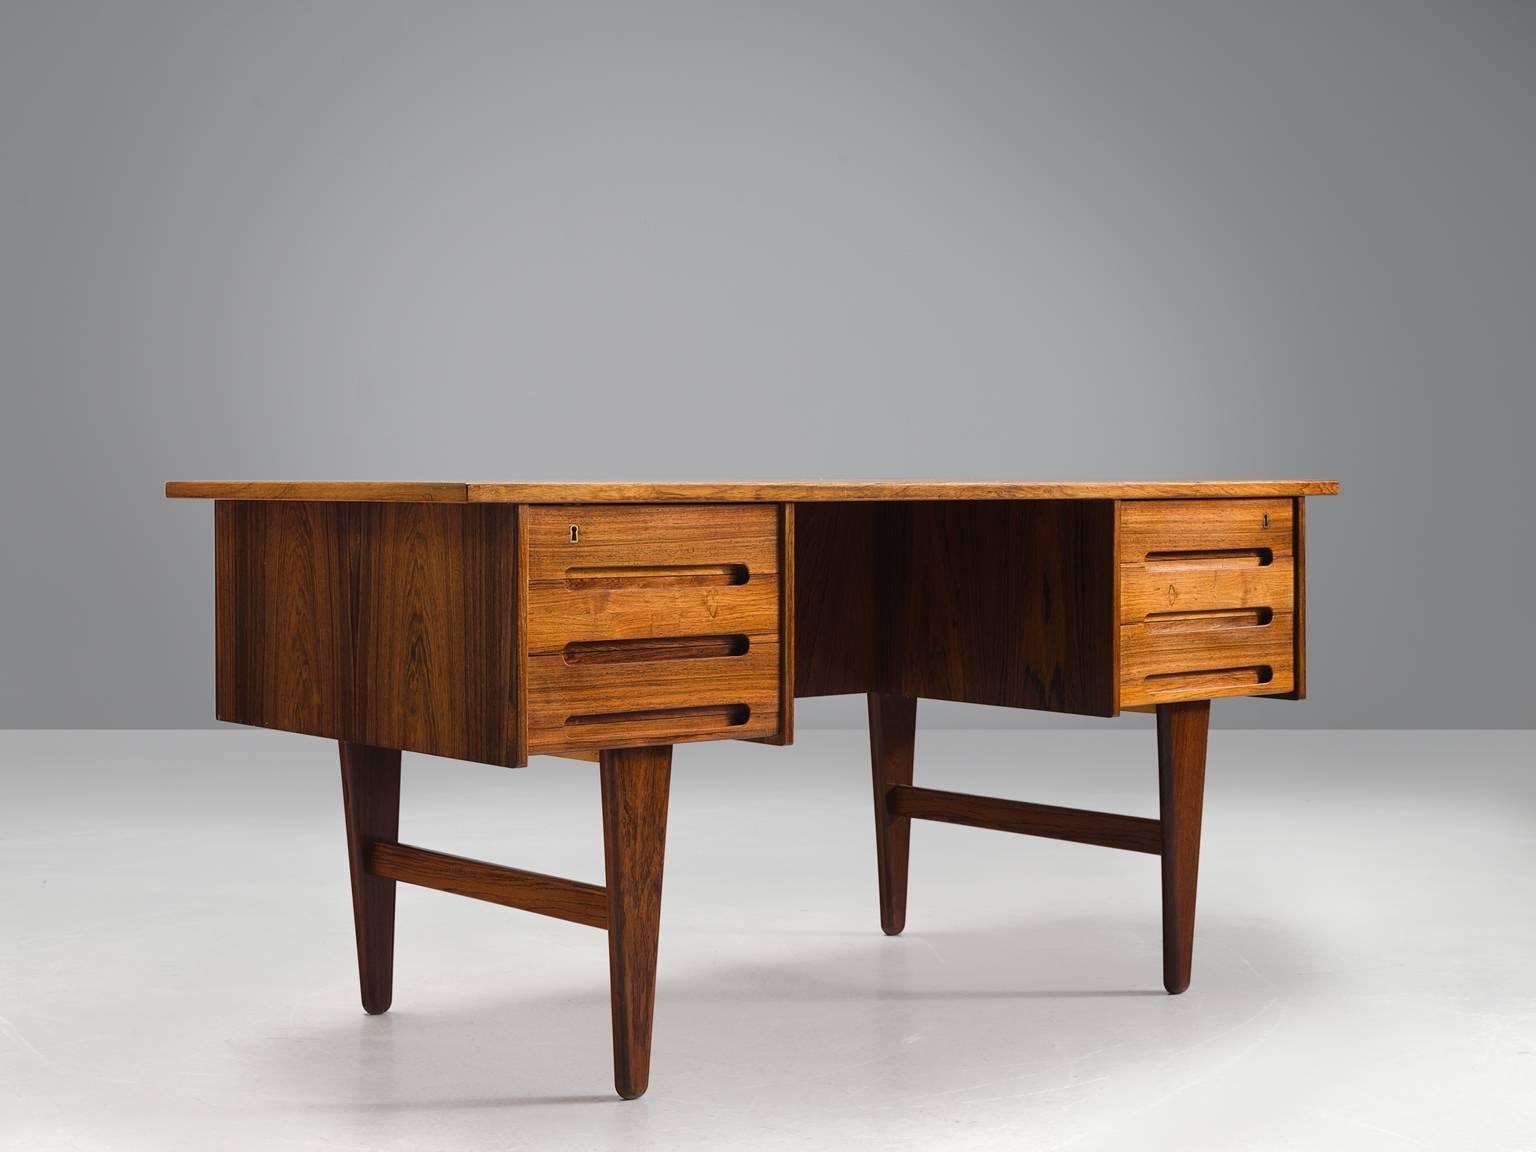 Kai Kristiansen, desk, rosewood and brass, Denmark, 1950s. 

This elegant, small desk is designed by is a Danish furniture designer Kai Kristiansen. The desk is executed in the finest rosewood and features two sections with a drawers on each side.